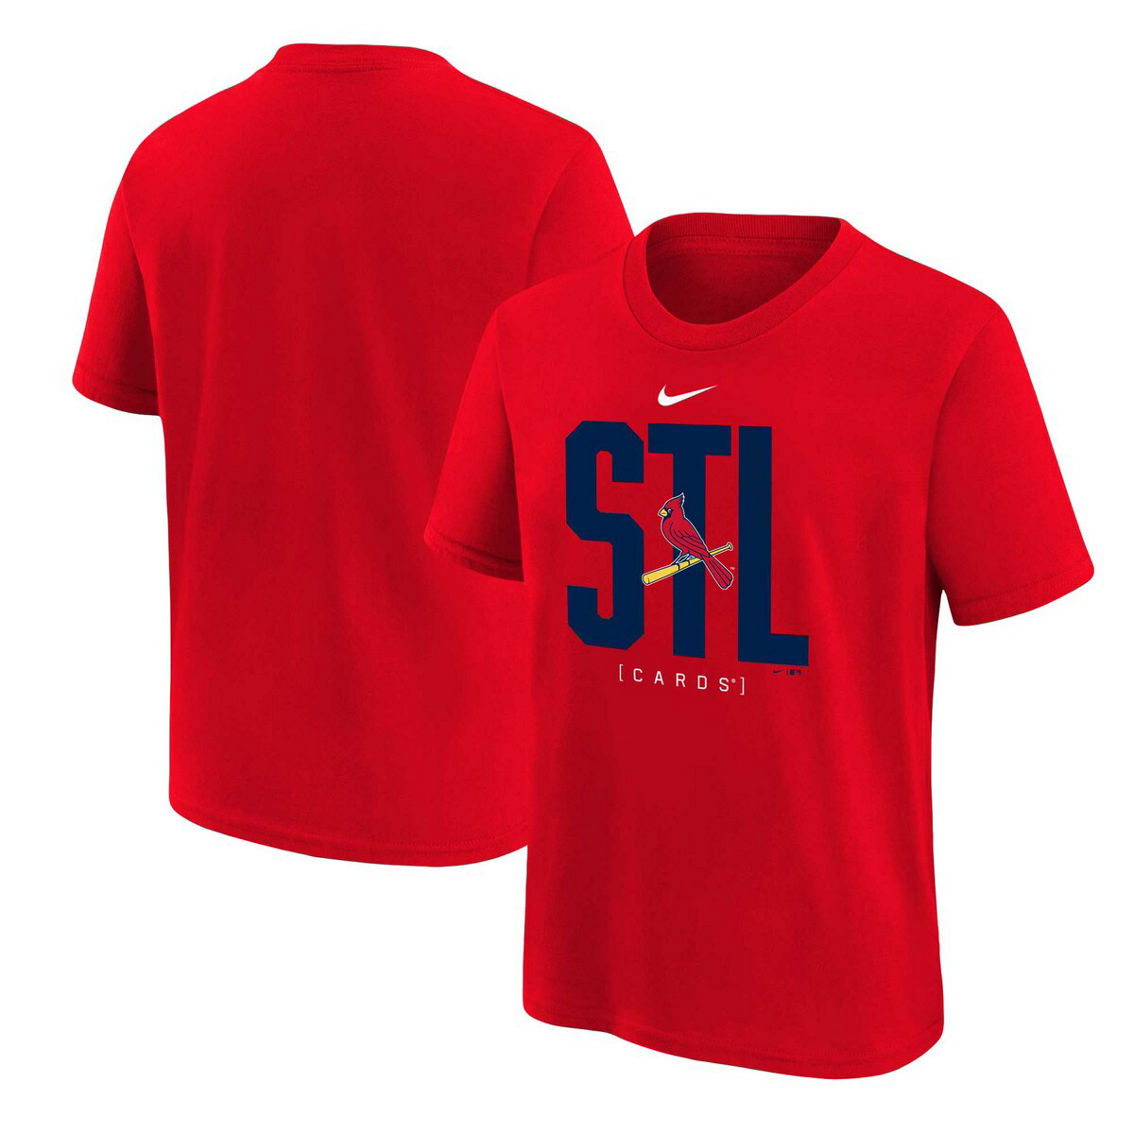 Nike Youth Red St. Louis Cardinals Scoreboard T-Shirt - Image 2 of 4